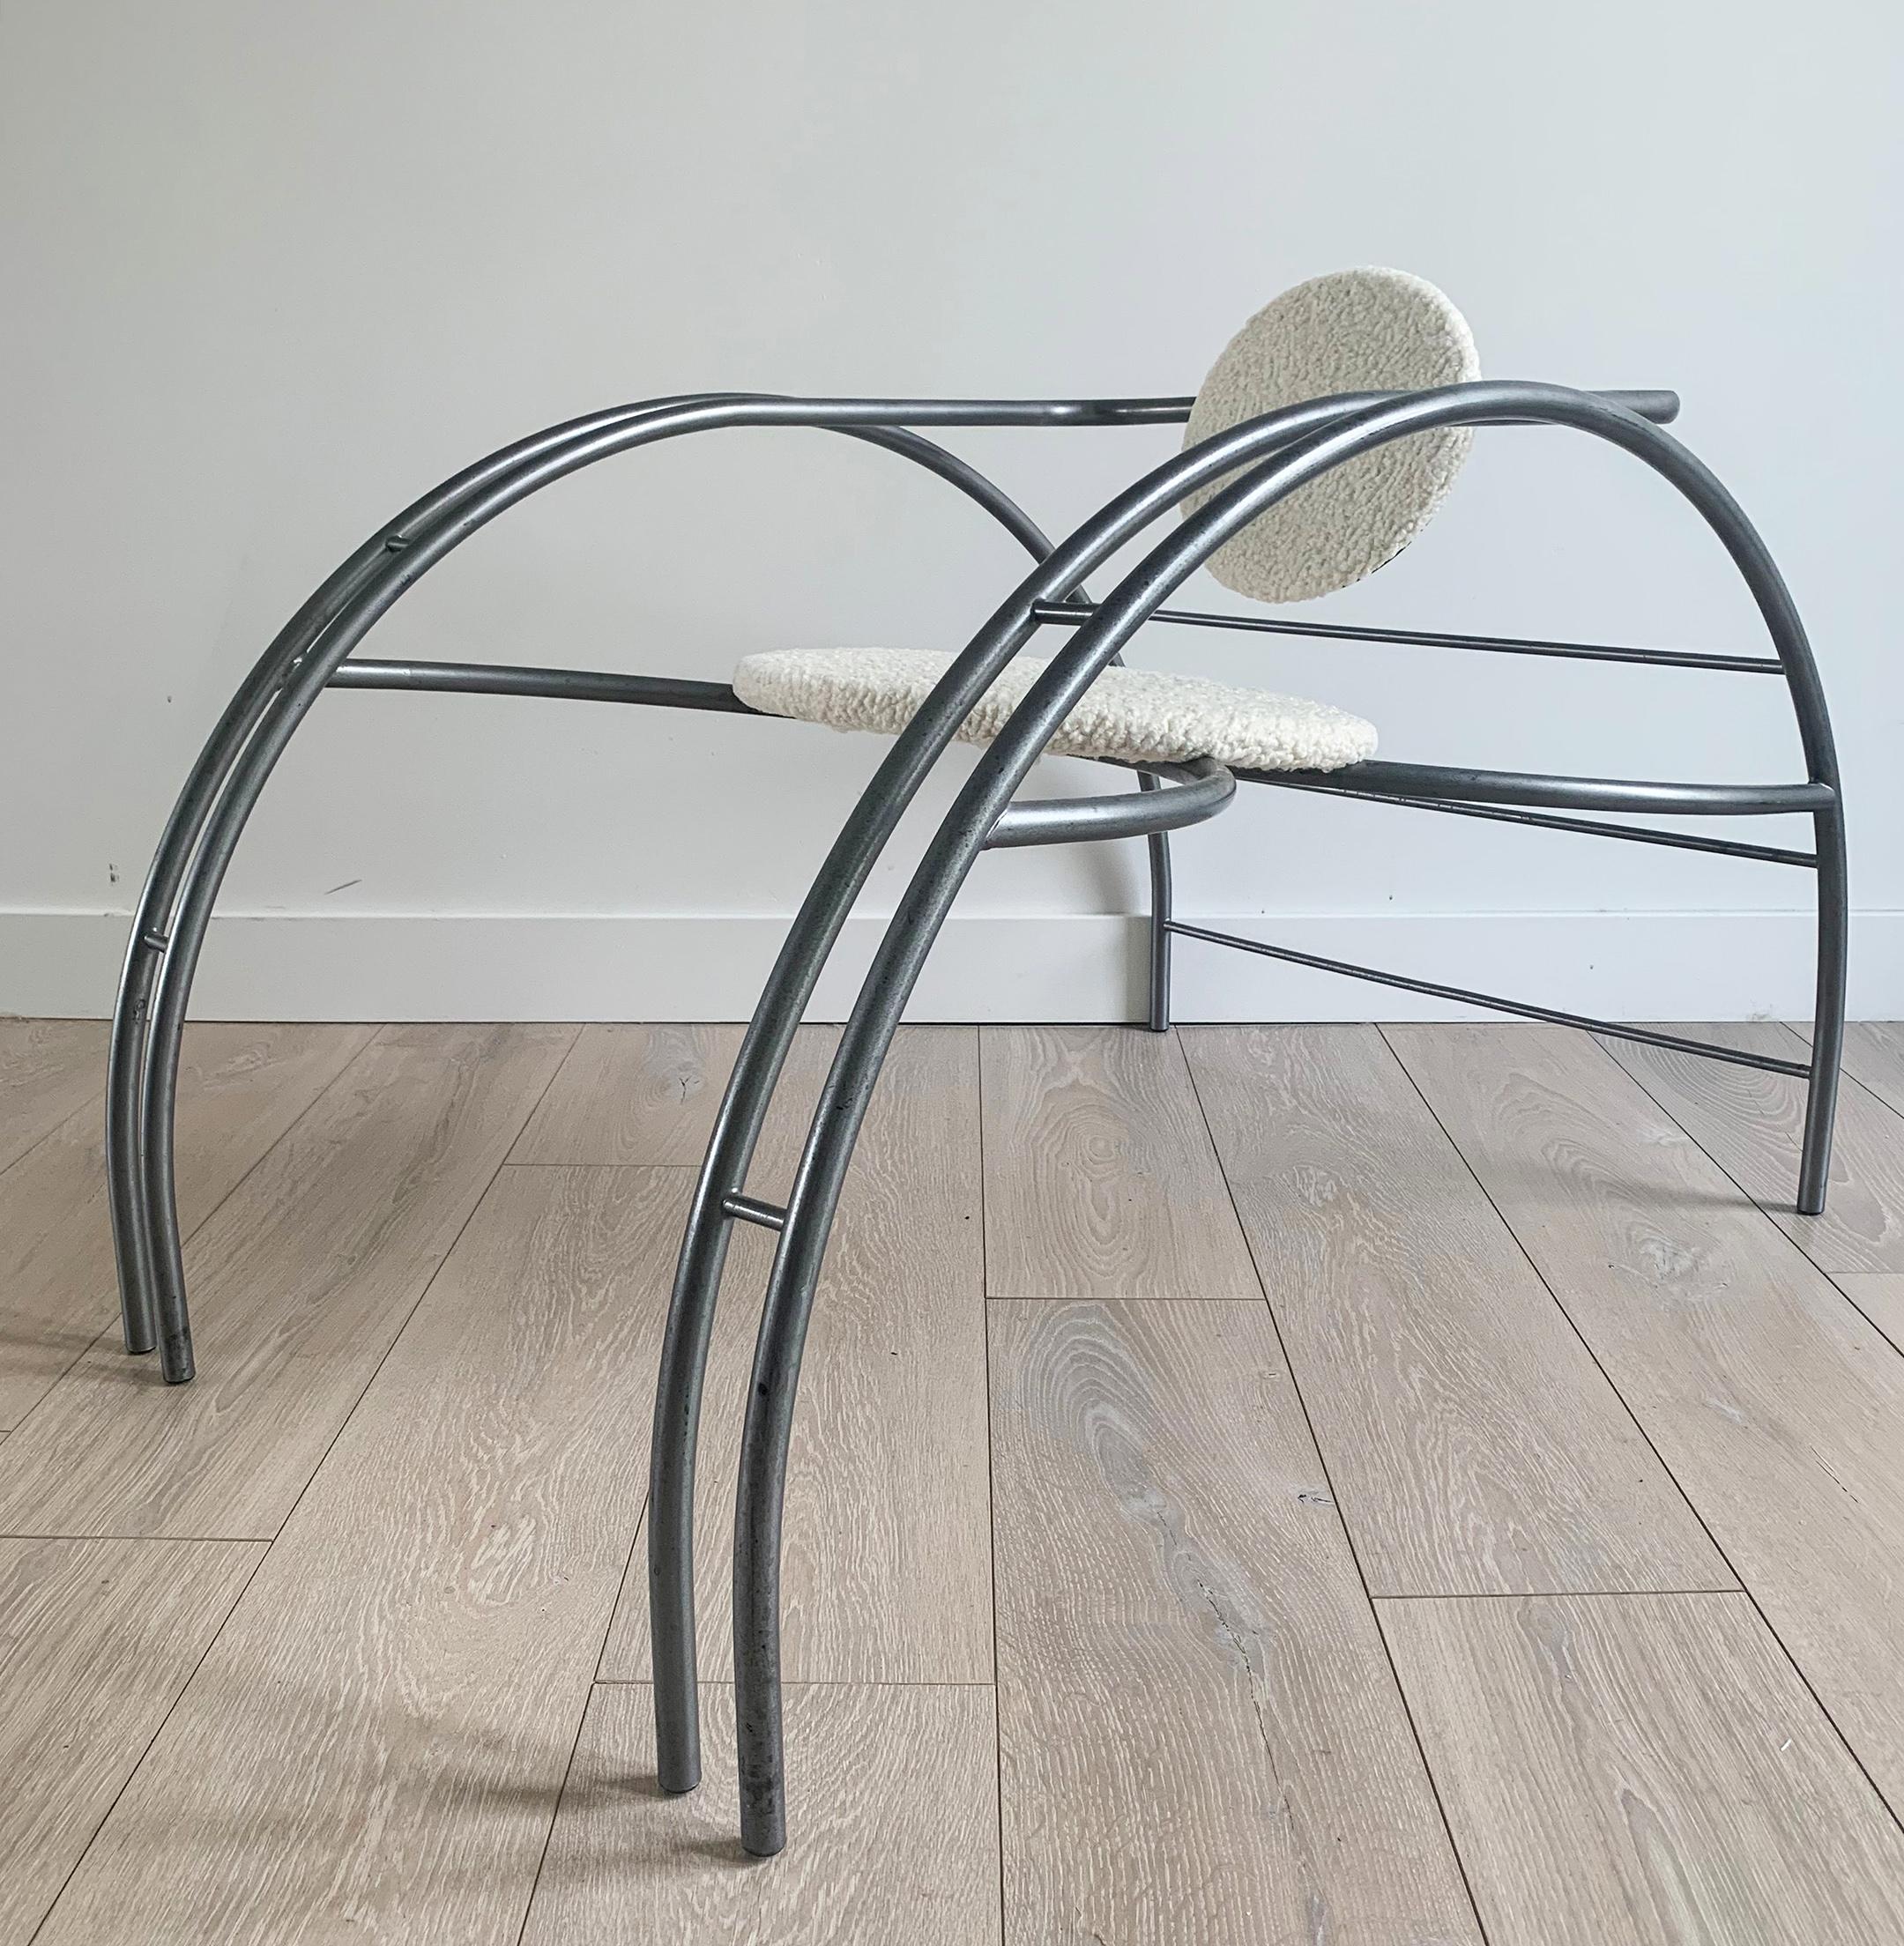 An absolutely stunning Quebec 69 spider chair by Canadian Postmodern Design Group Les Amisca. This chair was designed in the 1980s and features a rounded steel Art Deco style body with a round seat and seat back that are upholstered in a luxurious